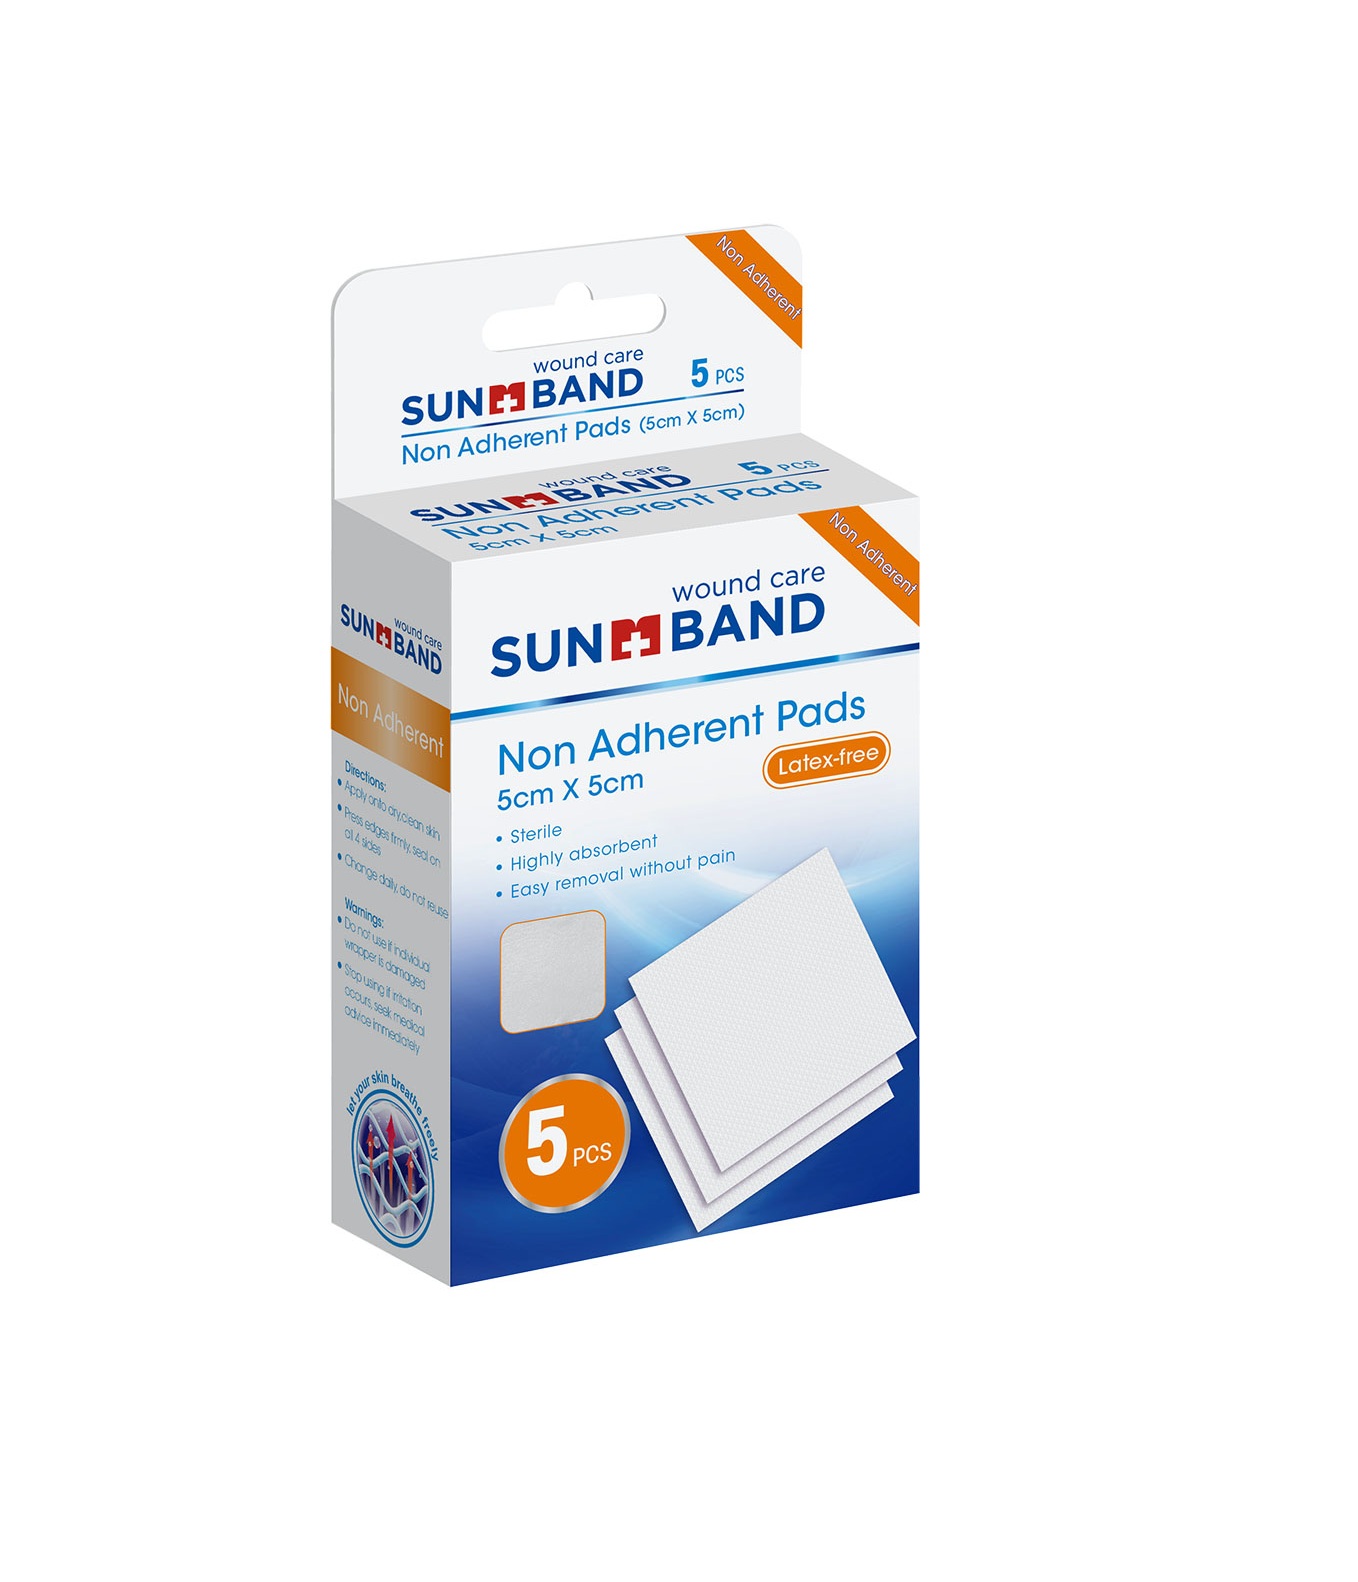 Square Sterile Highly Absorbent Non Adherent Pad for Wound Dressing